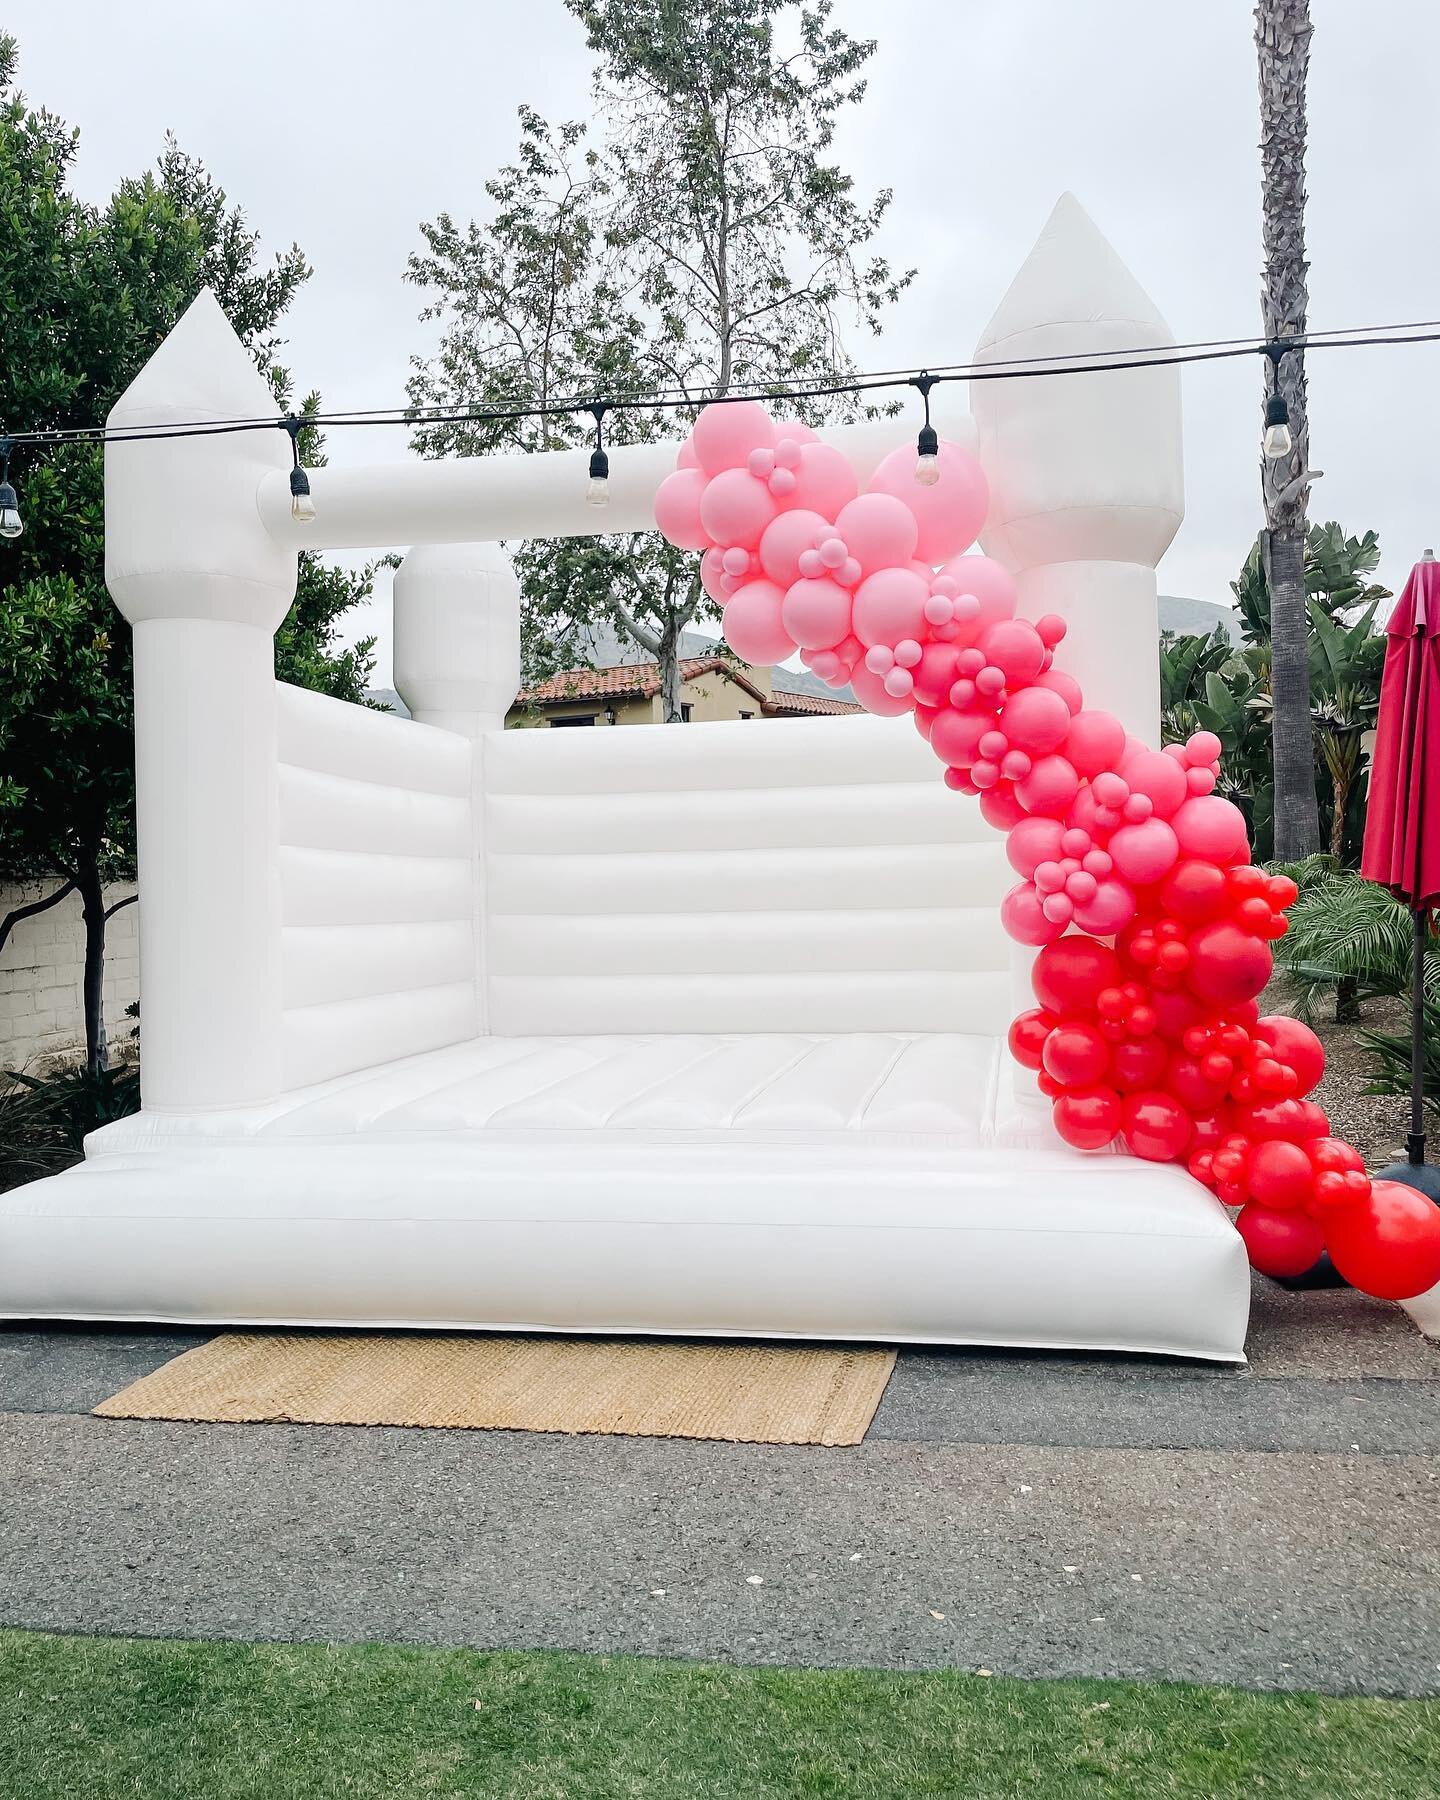 Kicked off last weekend with this set up for The Crosby Club's Mother's Day Brunch 💕💐

#whitebouncehouse #whitebouncehousesandiego #modernbouncehouse #balloonssandiego #balloondecor #balloongarland #sandiegoparty #sandiegopartyplanner #sandiegopart